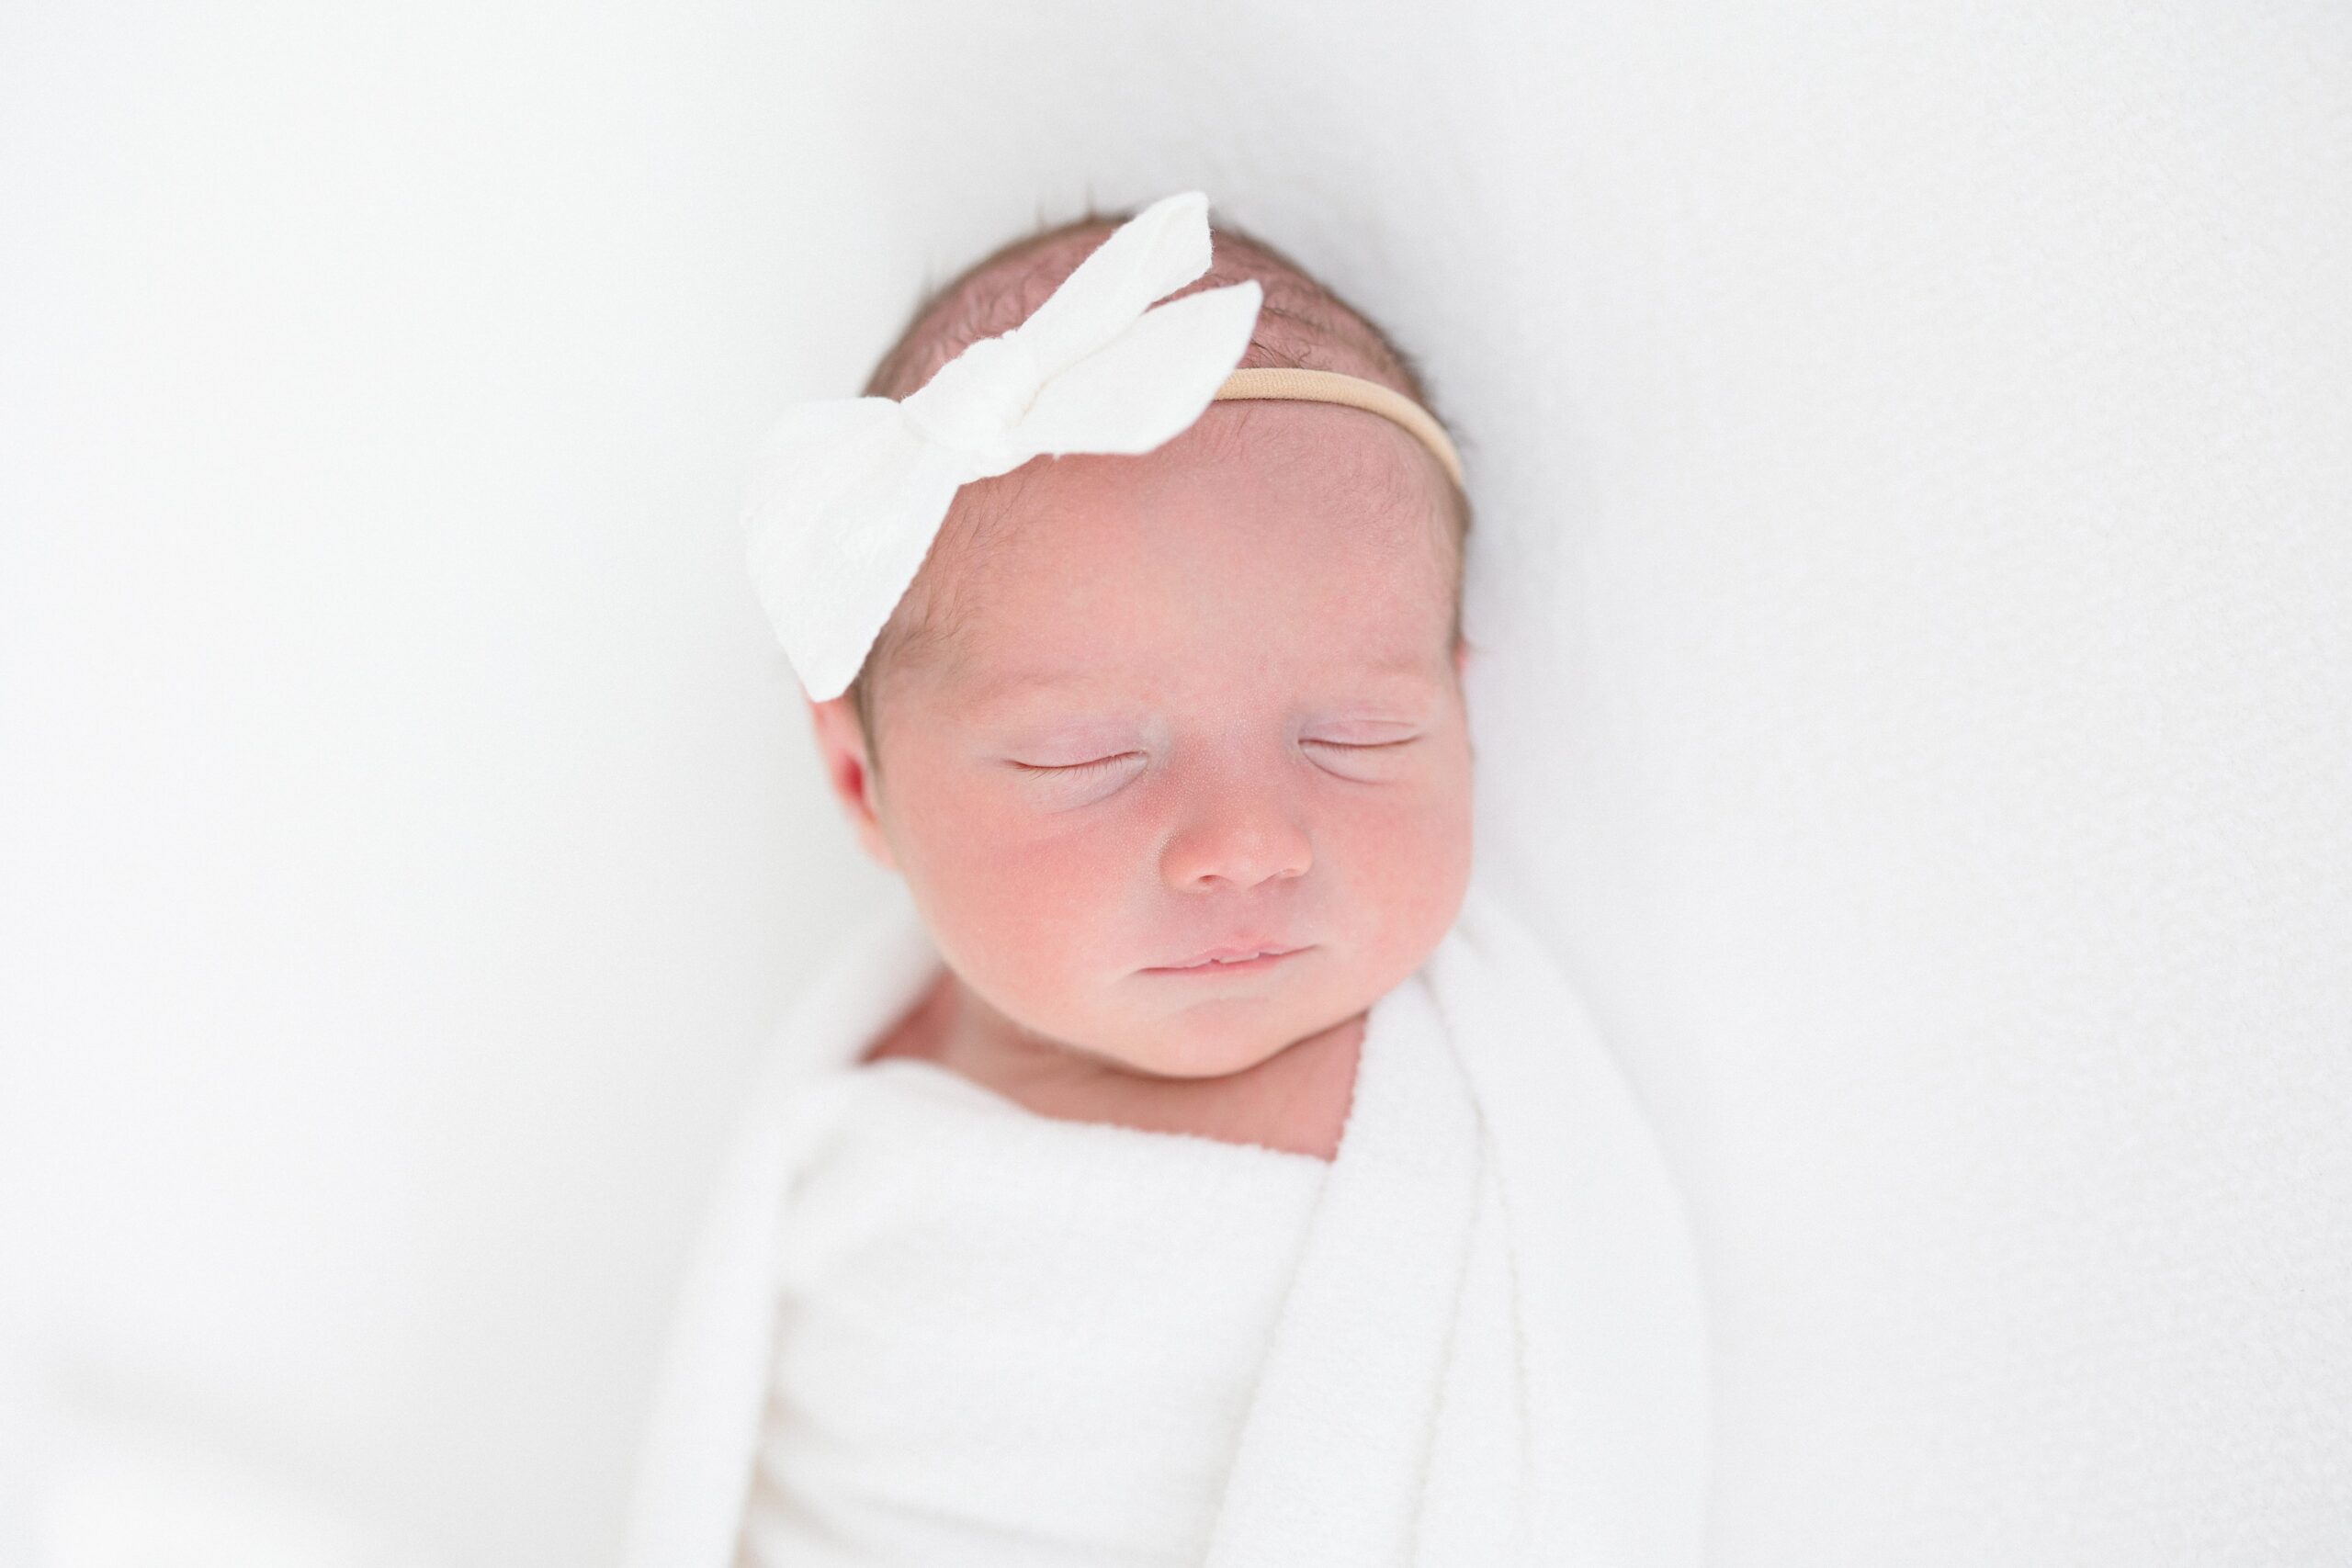 Newborn baby girl sleeping on a white backdrop during her newborn photo session